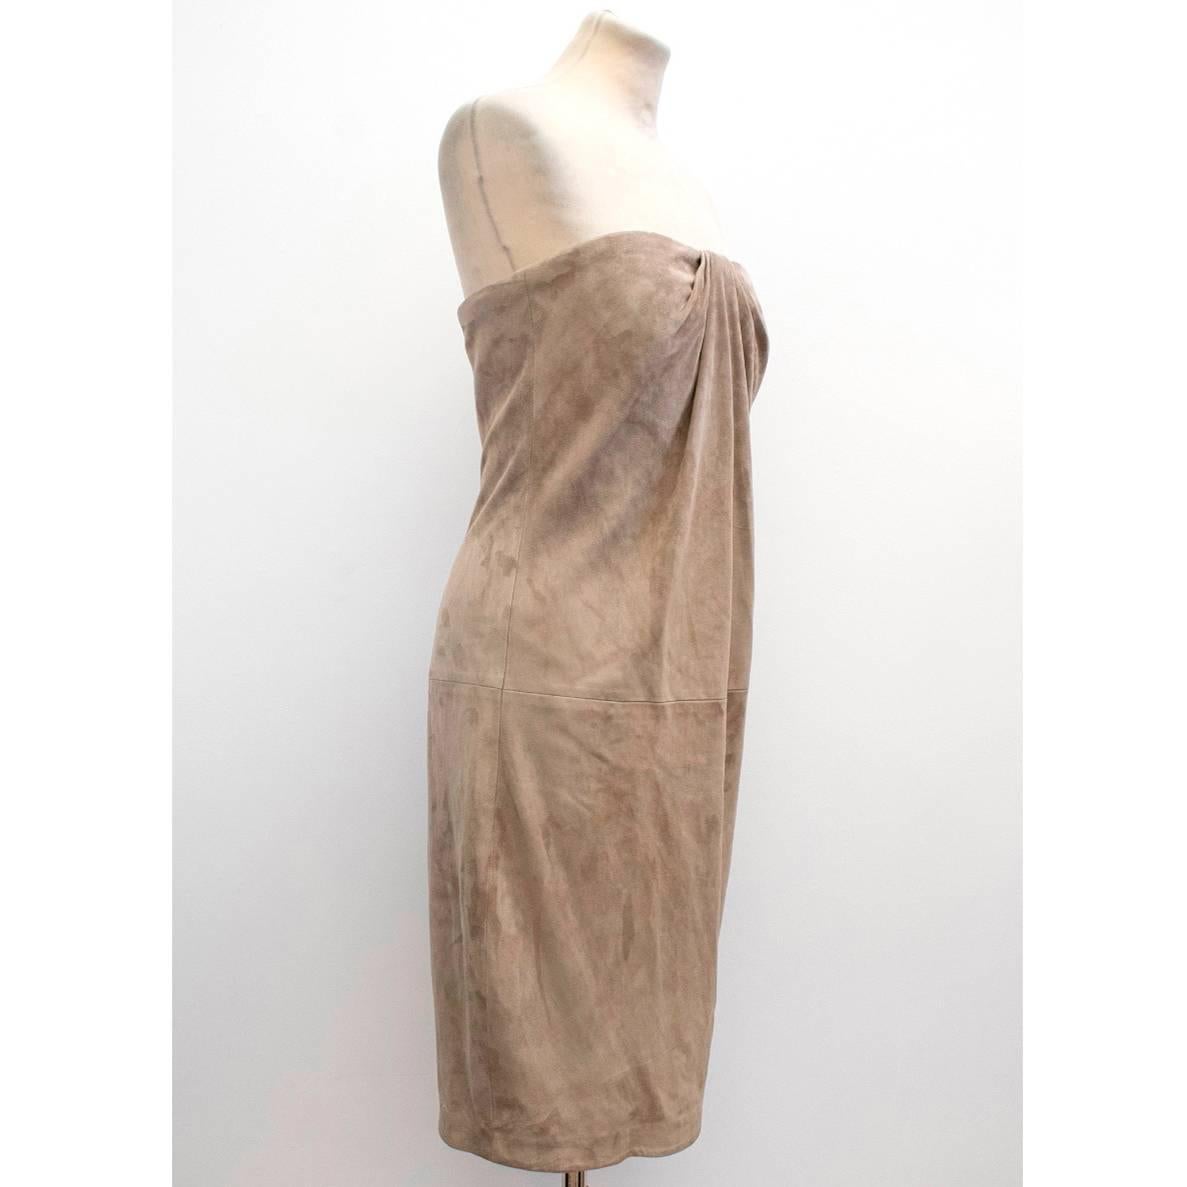 Ralph Lauren taupe suede strapless dress in a knee-length style with gathered detail at the bust. Lined with silk and fastens with a back zip. 

Condition: 10/10

Measurements are taken laying flat, seam to seam. 
Approx.
Bust: 39 cm
Waist: